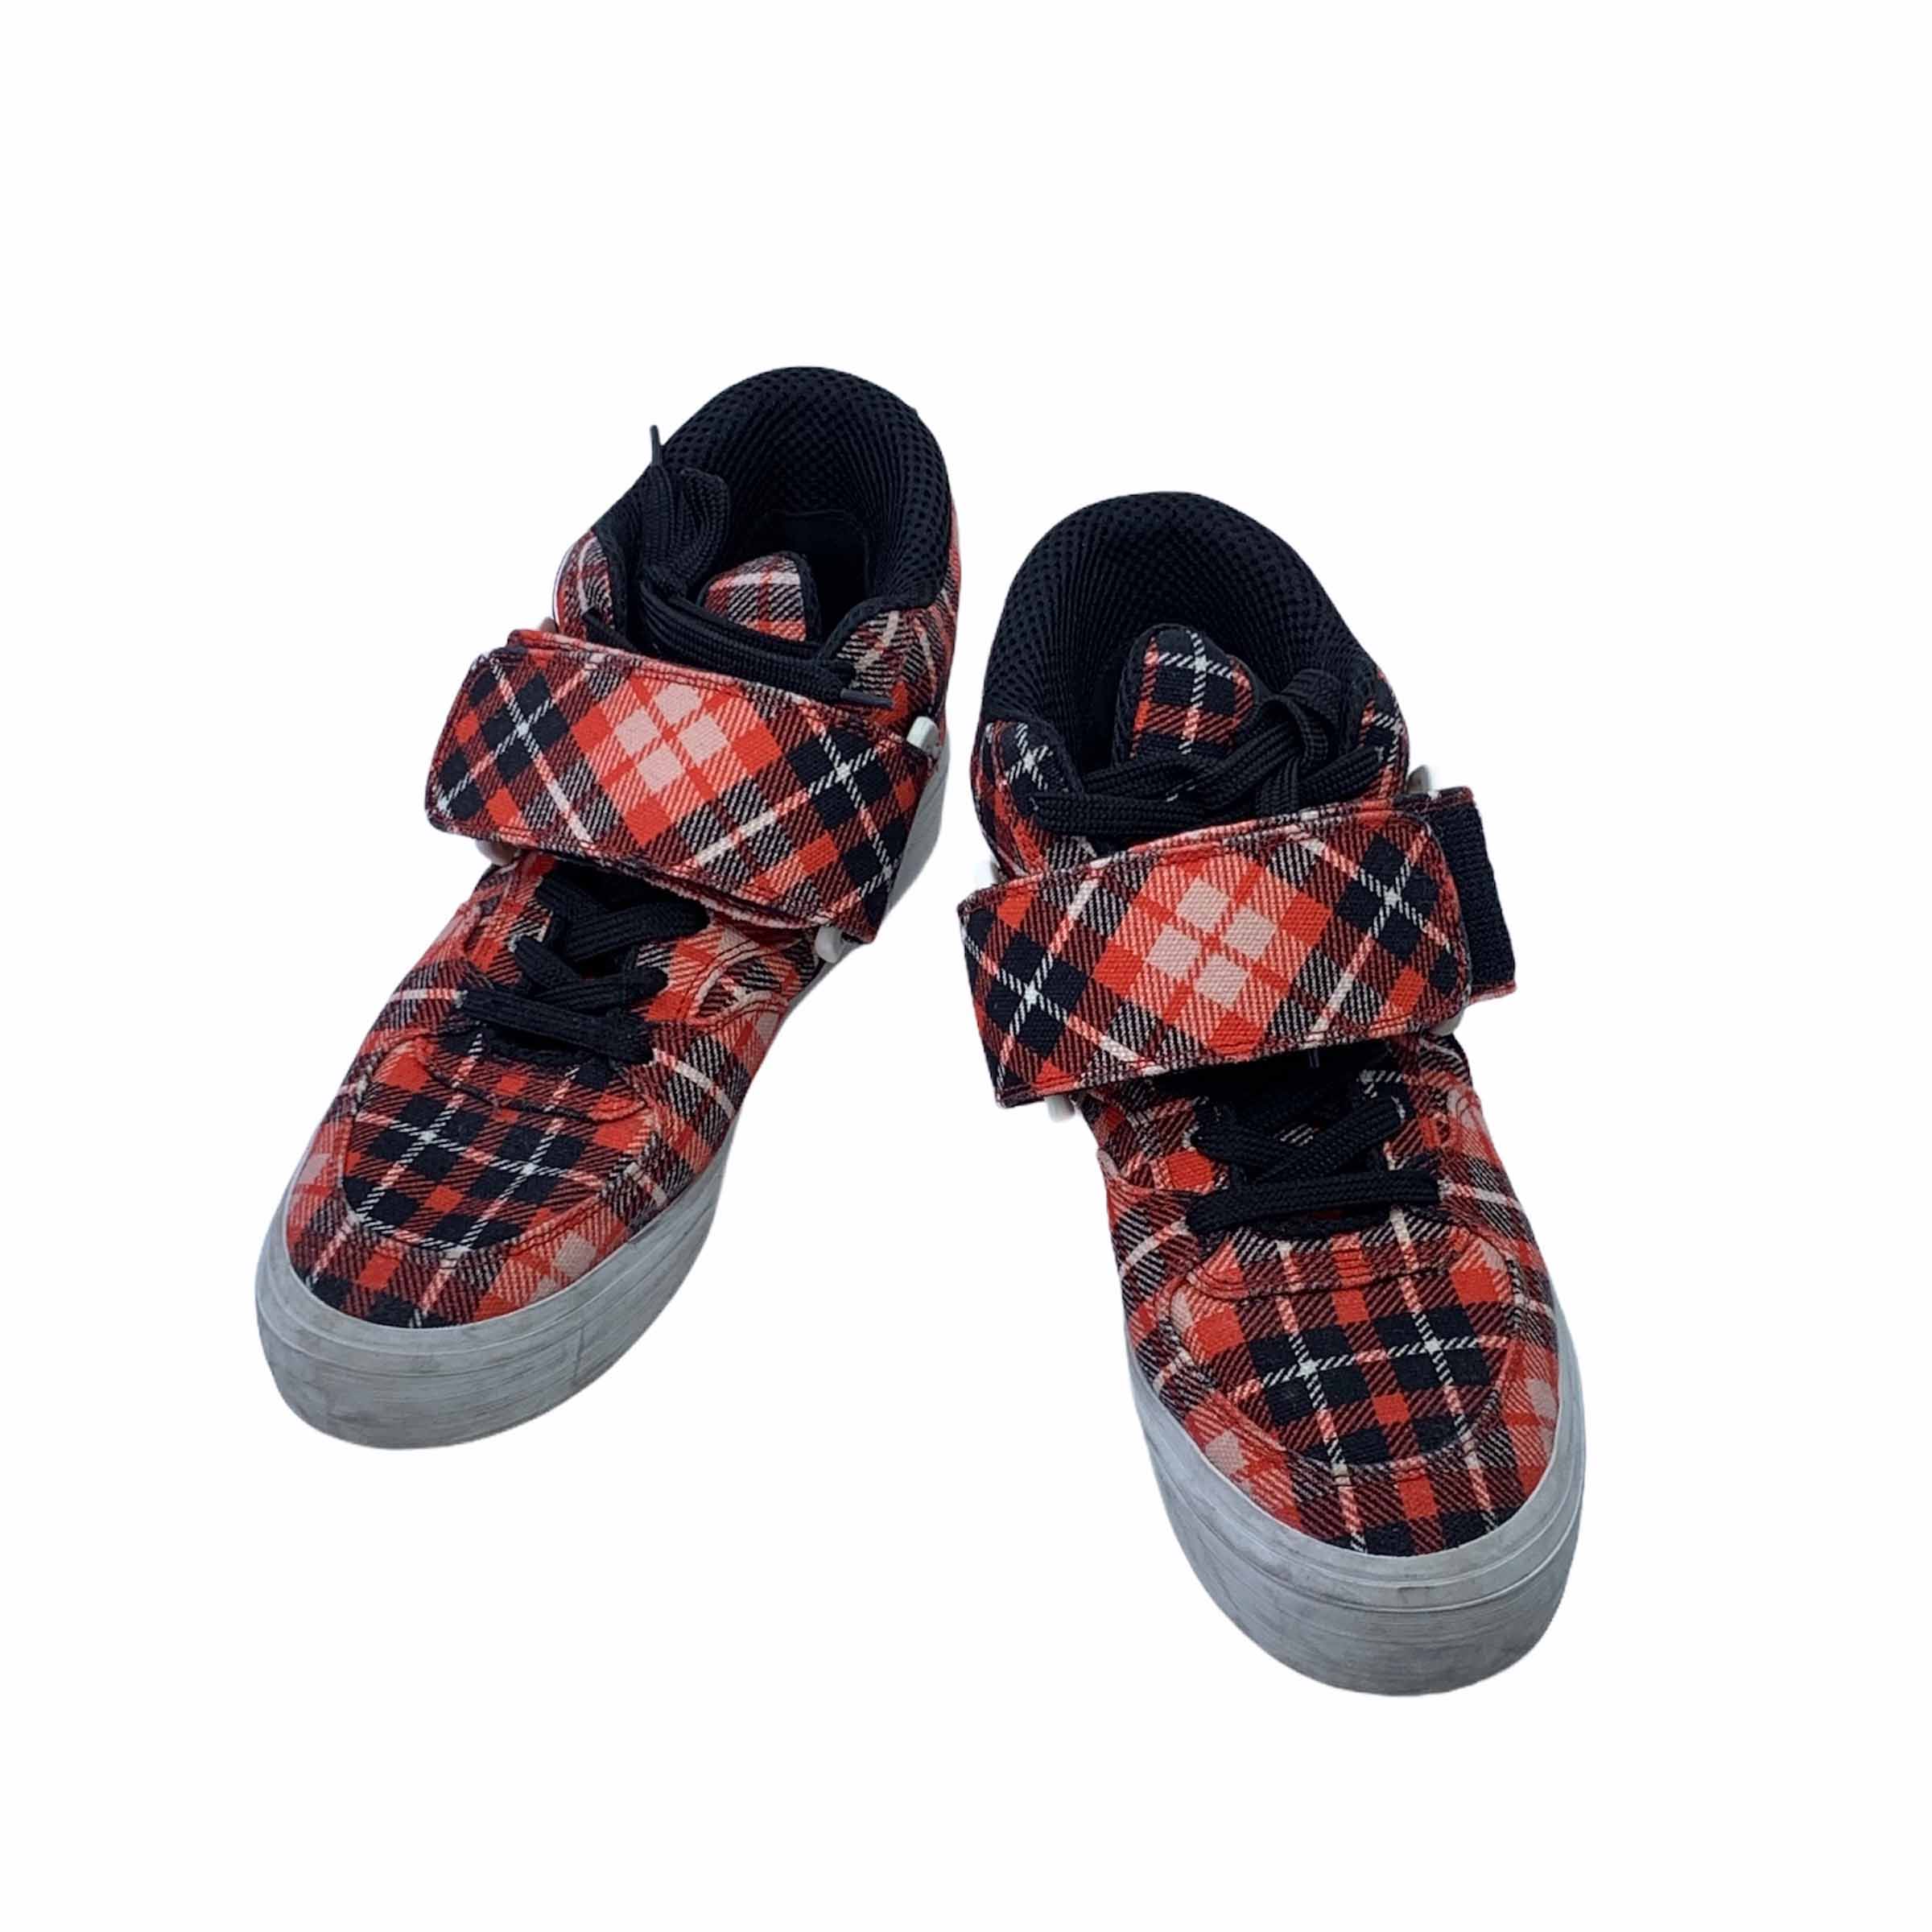 [MSGM] Check Patterned Midtop Velcro Sneakers - Size EUR40